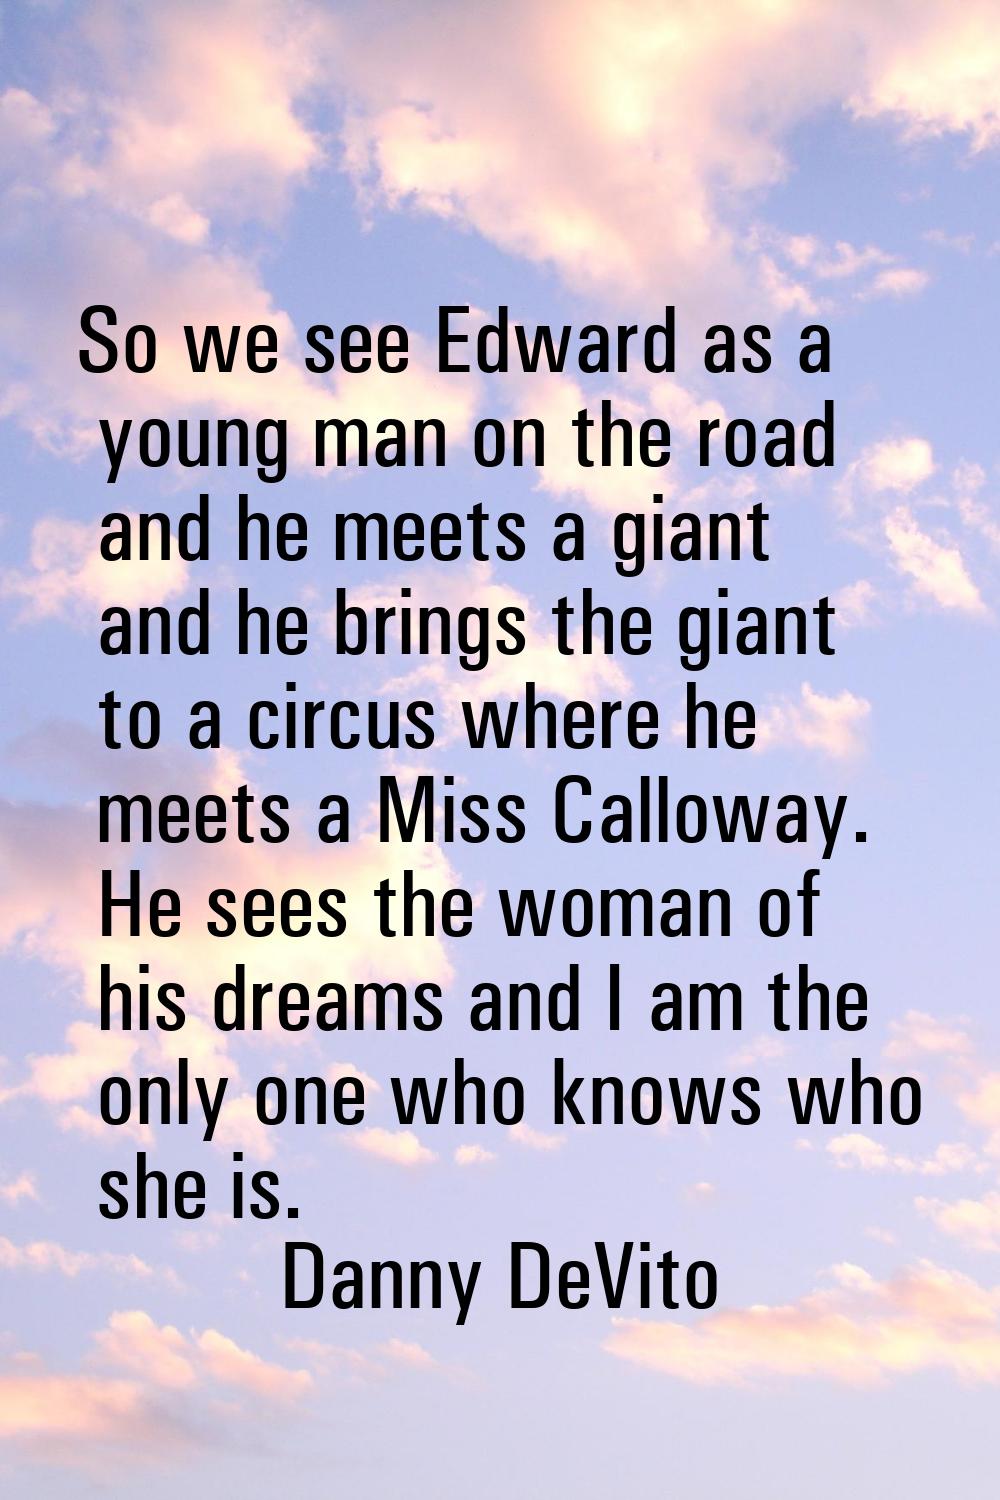 So we see Edward as a young man on the road and he meets a giant and he brings the giant to a circu